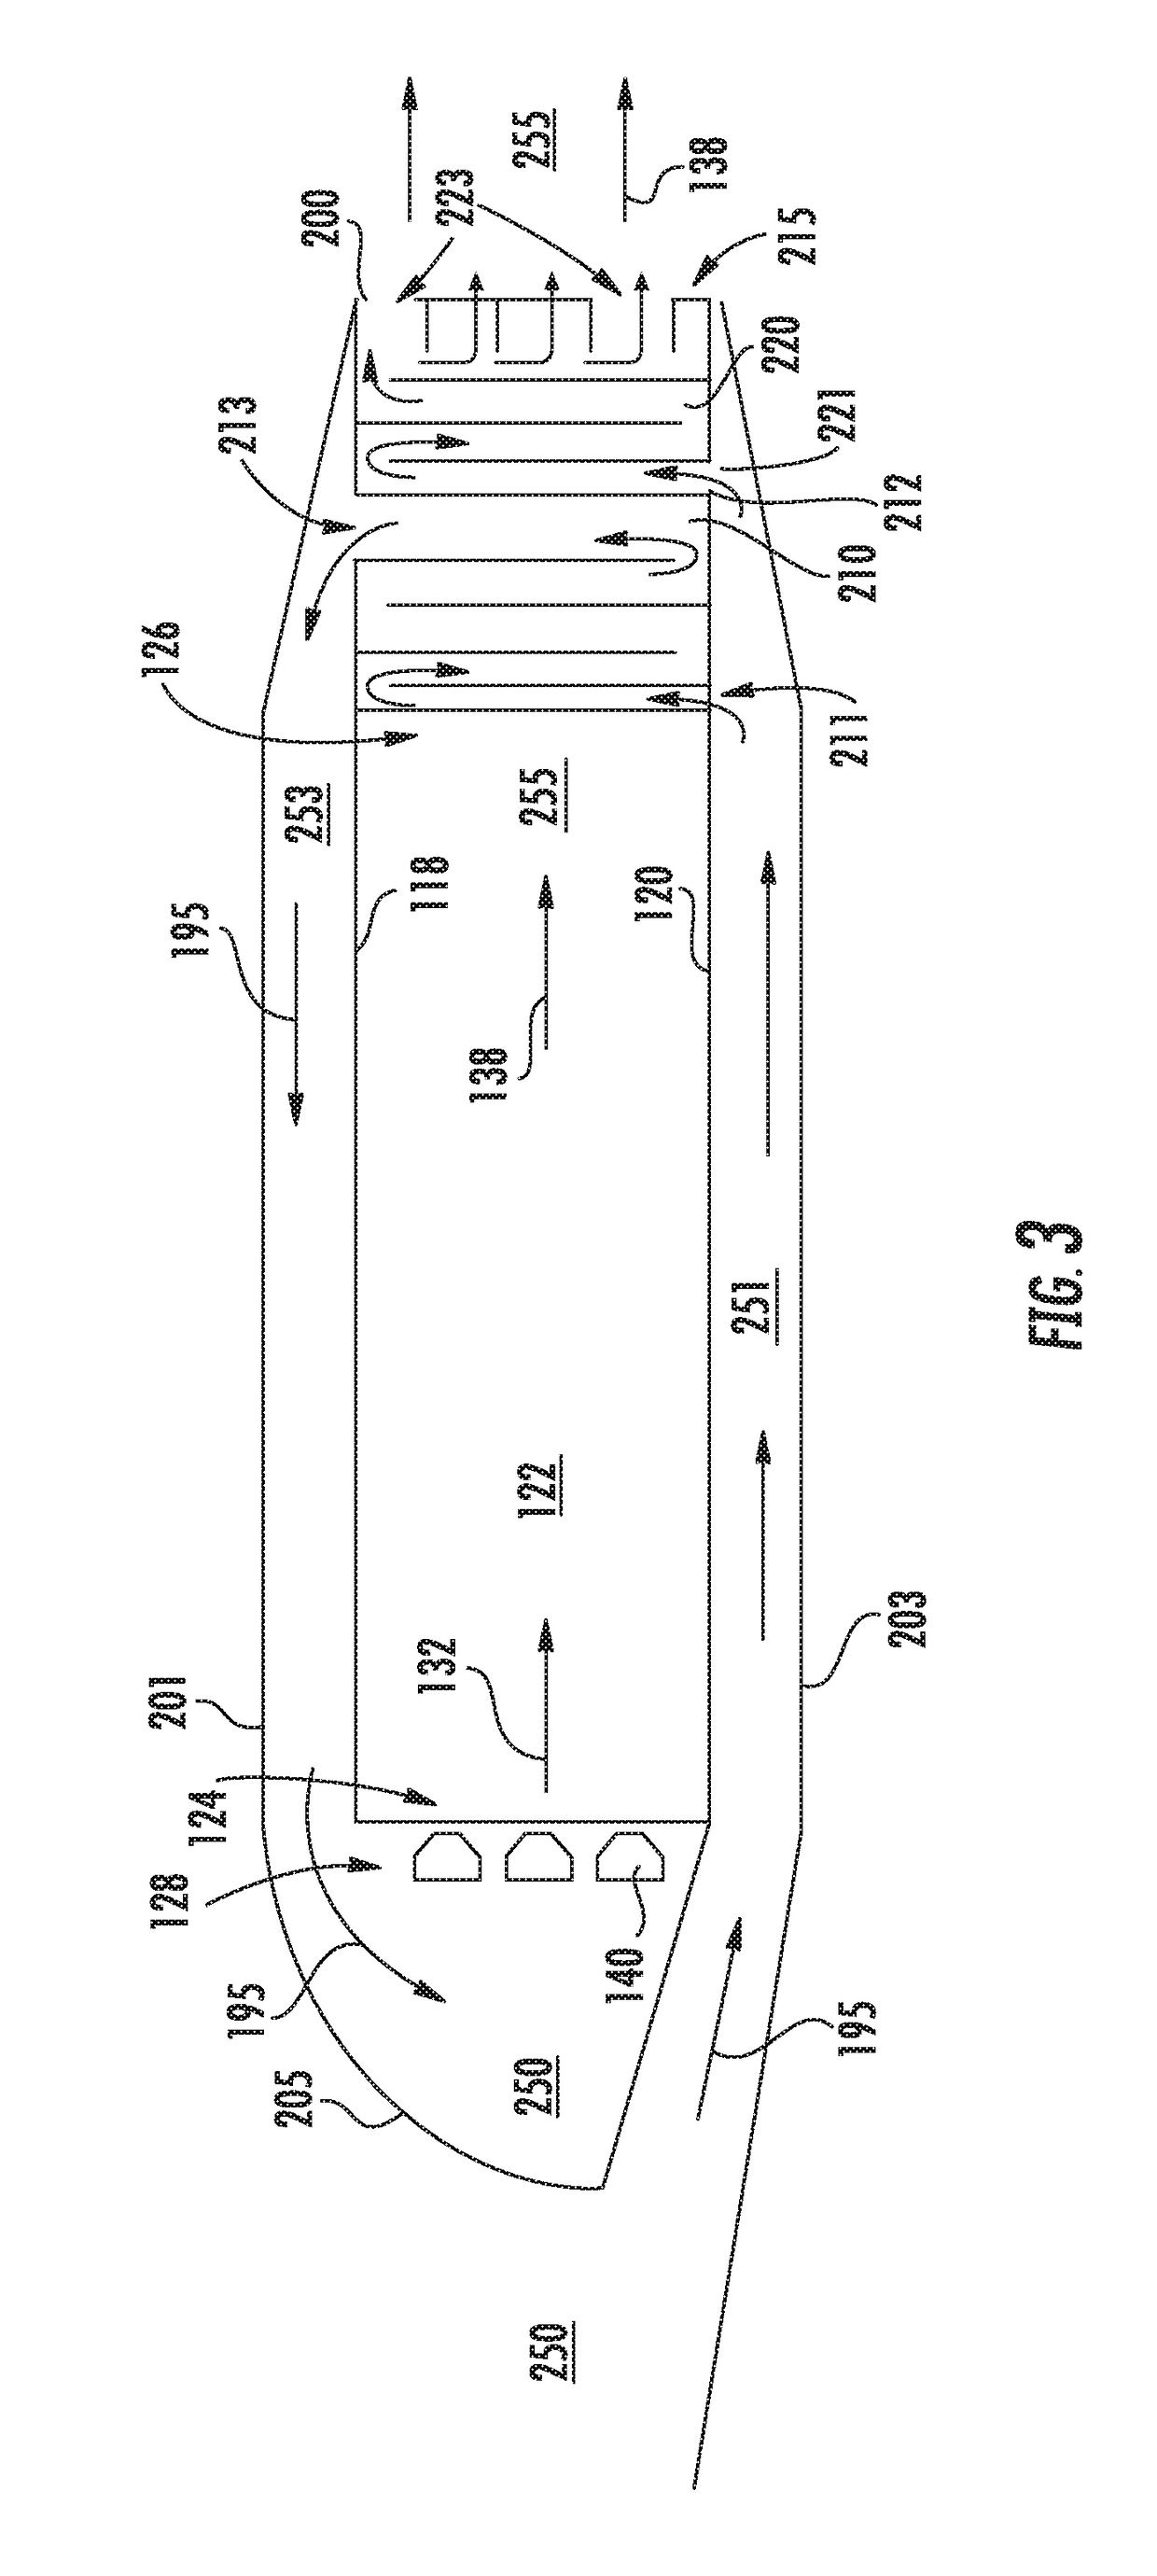 Combustion Section Heat Transfer System for a Propulsion System